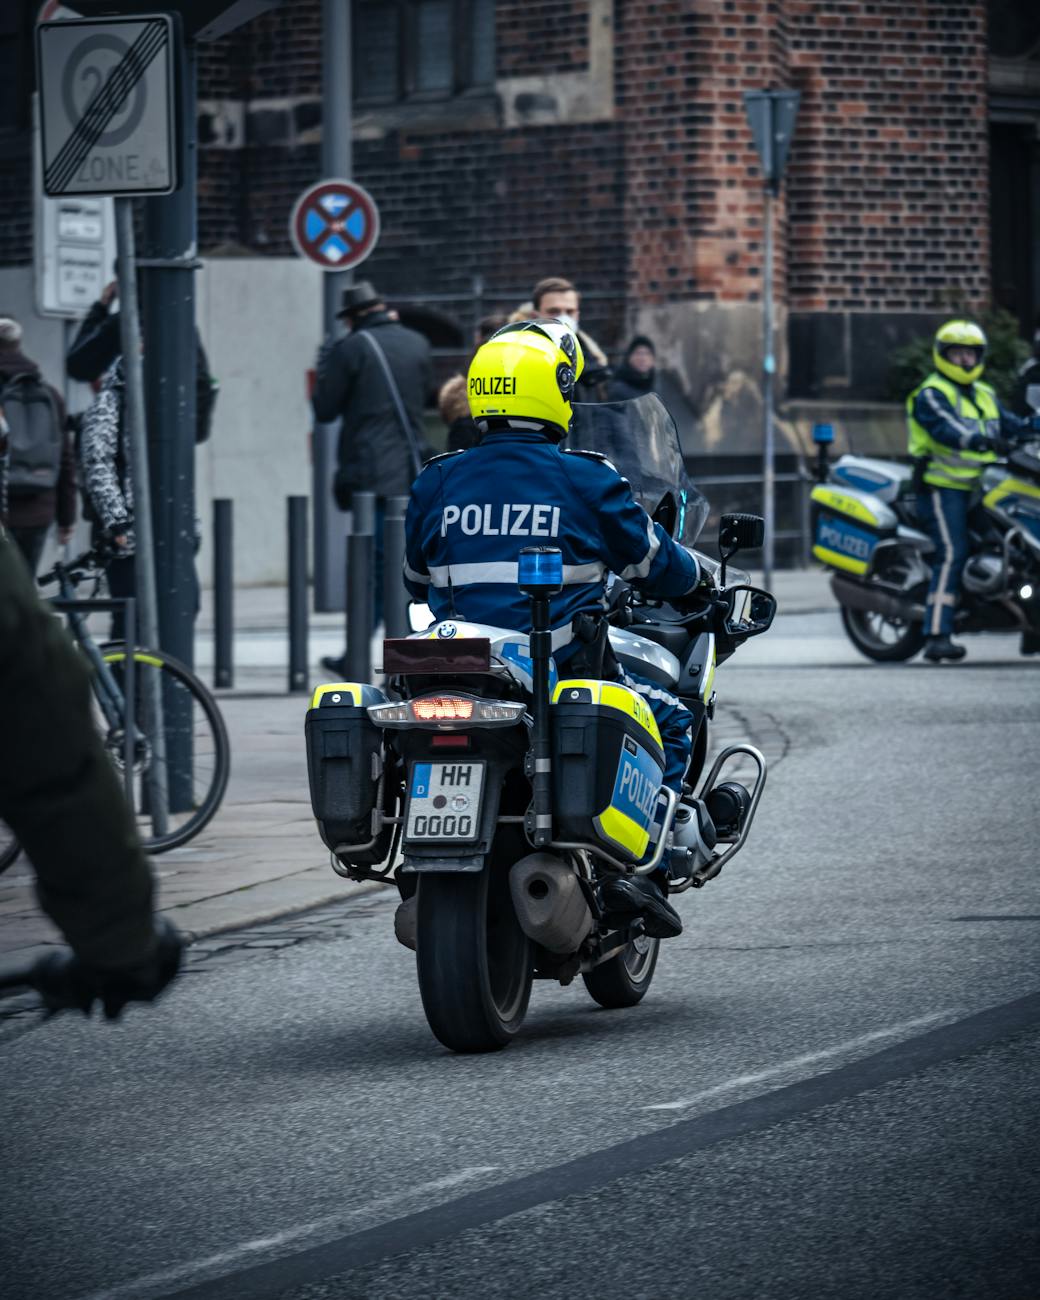 back view of a police officer riding a motorcycle